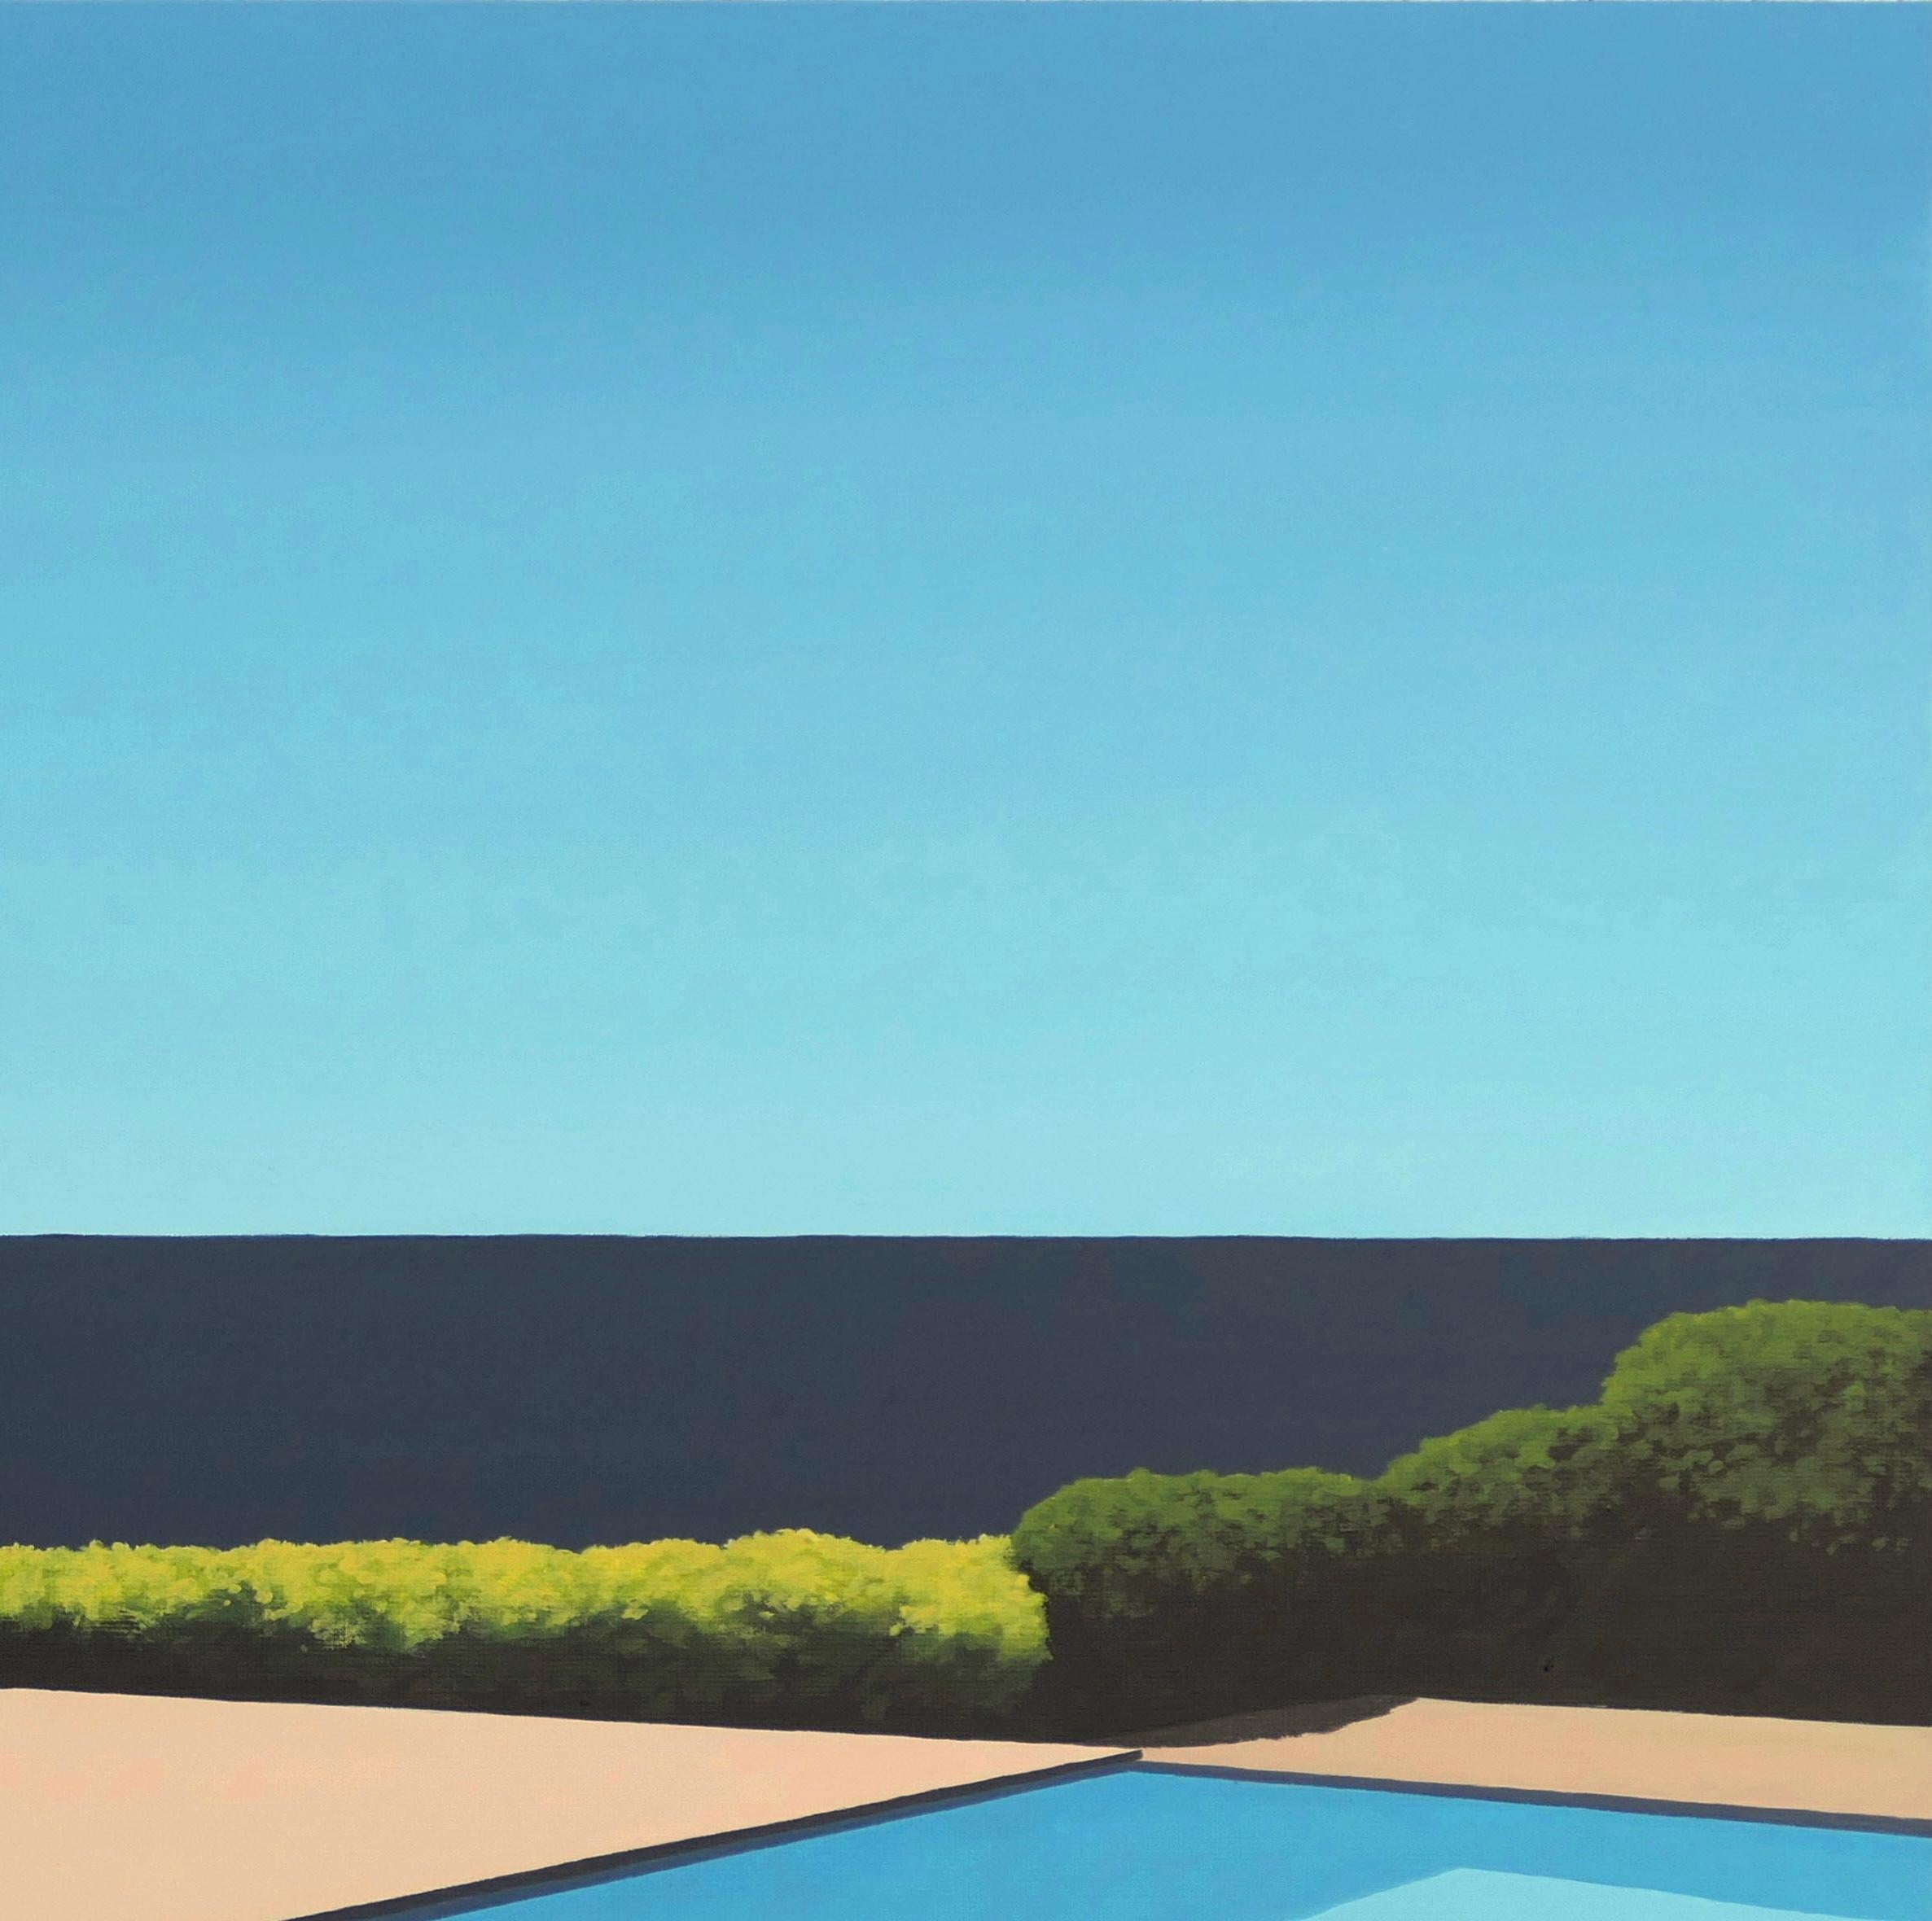 Pineapple by the pool - landscape painting 3